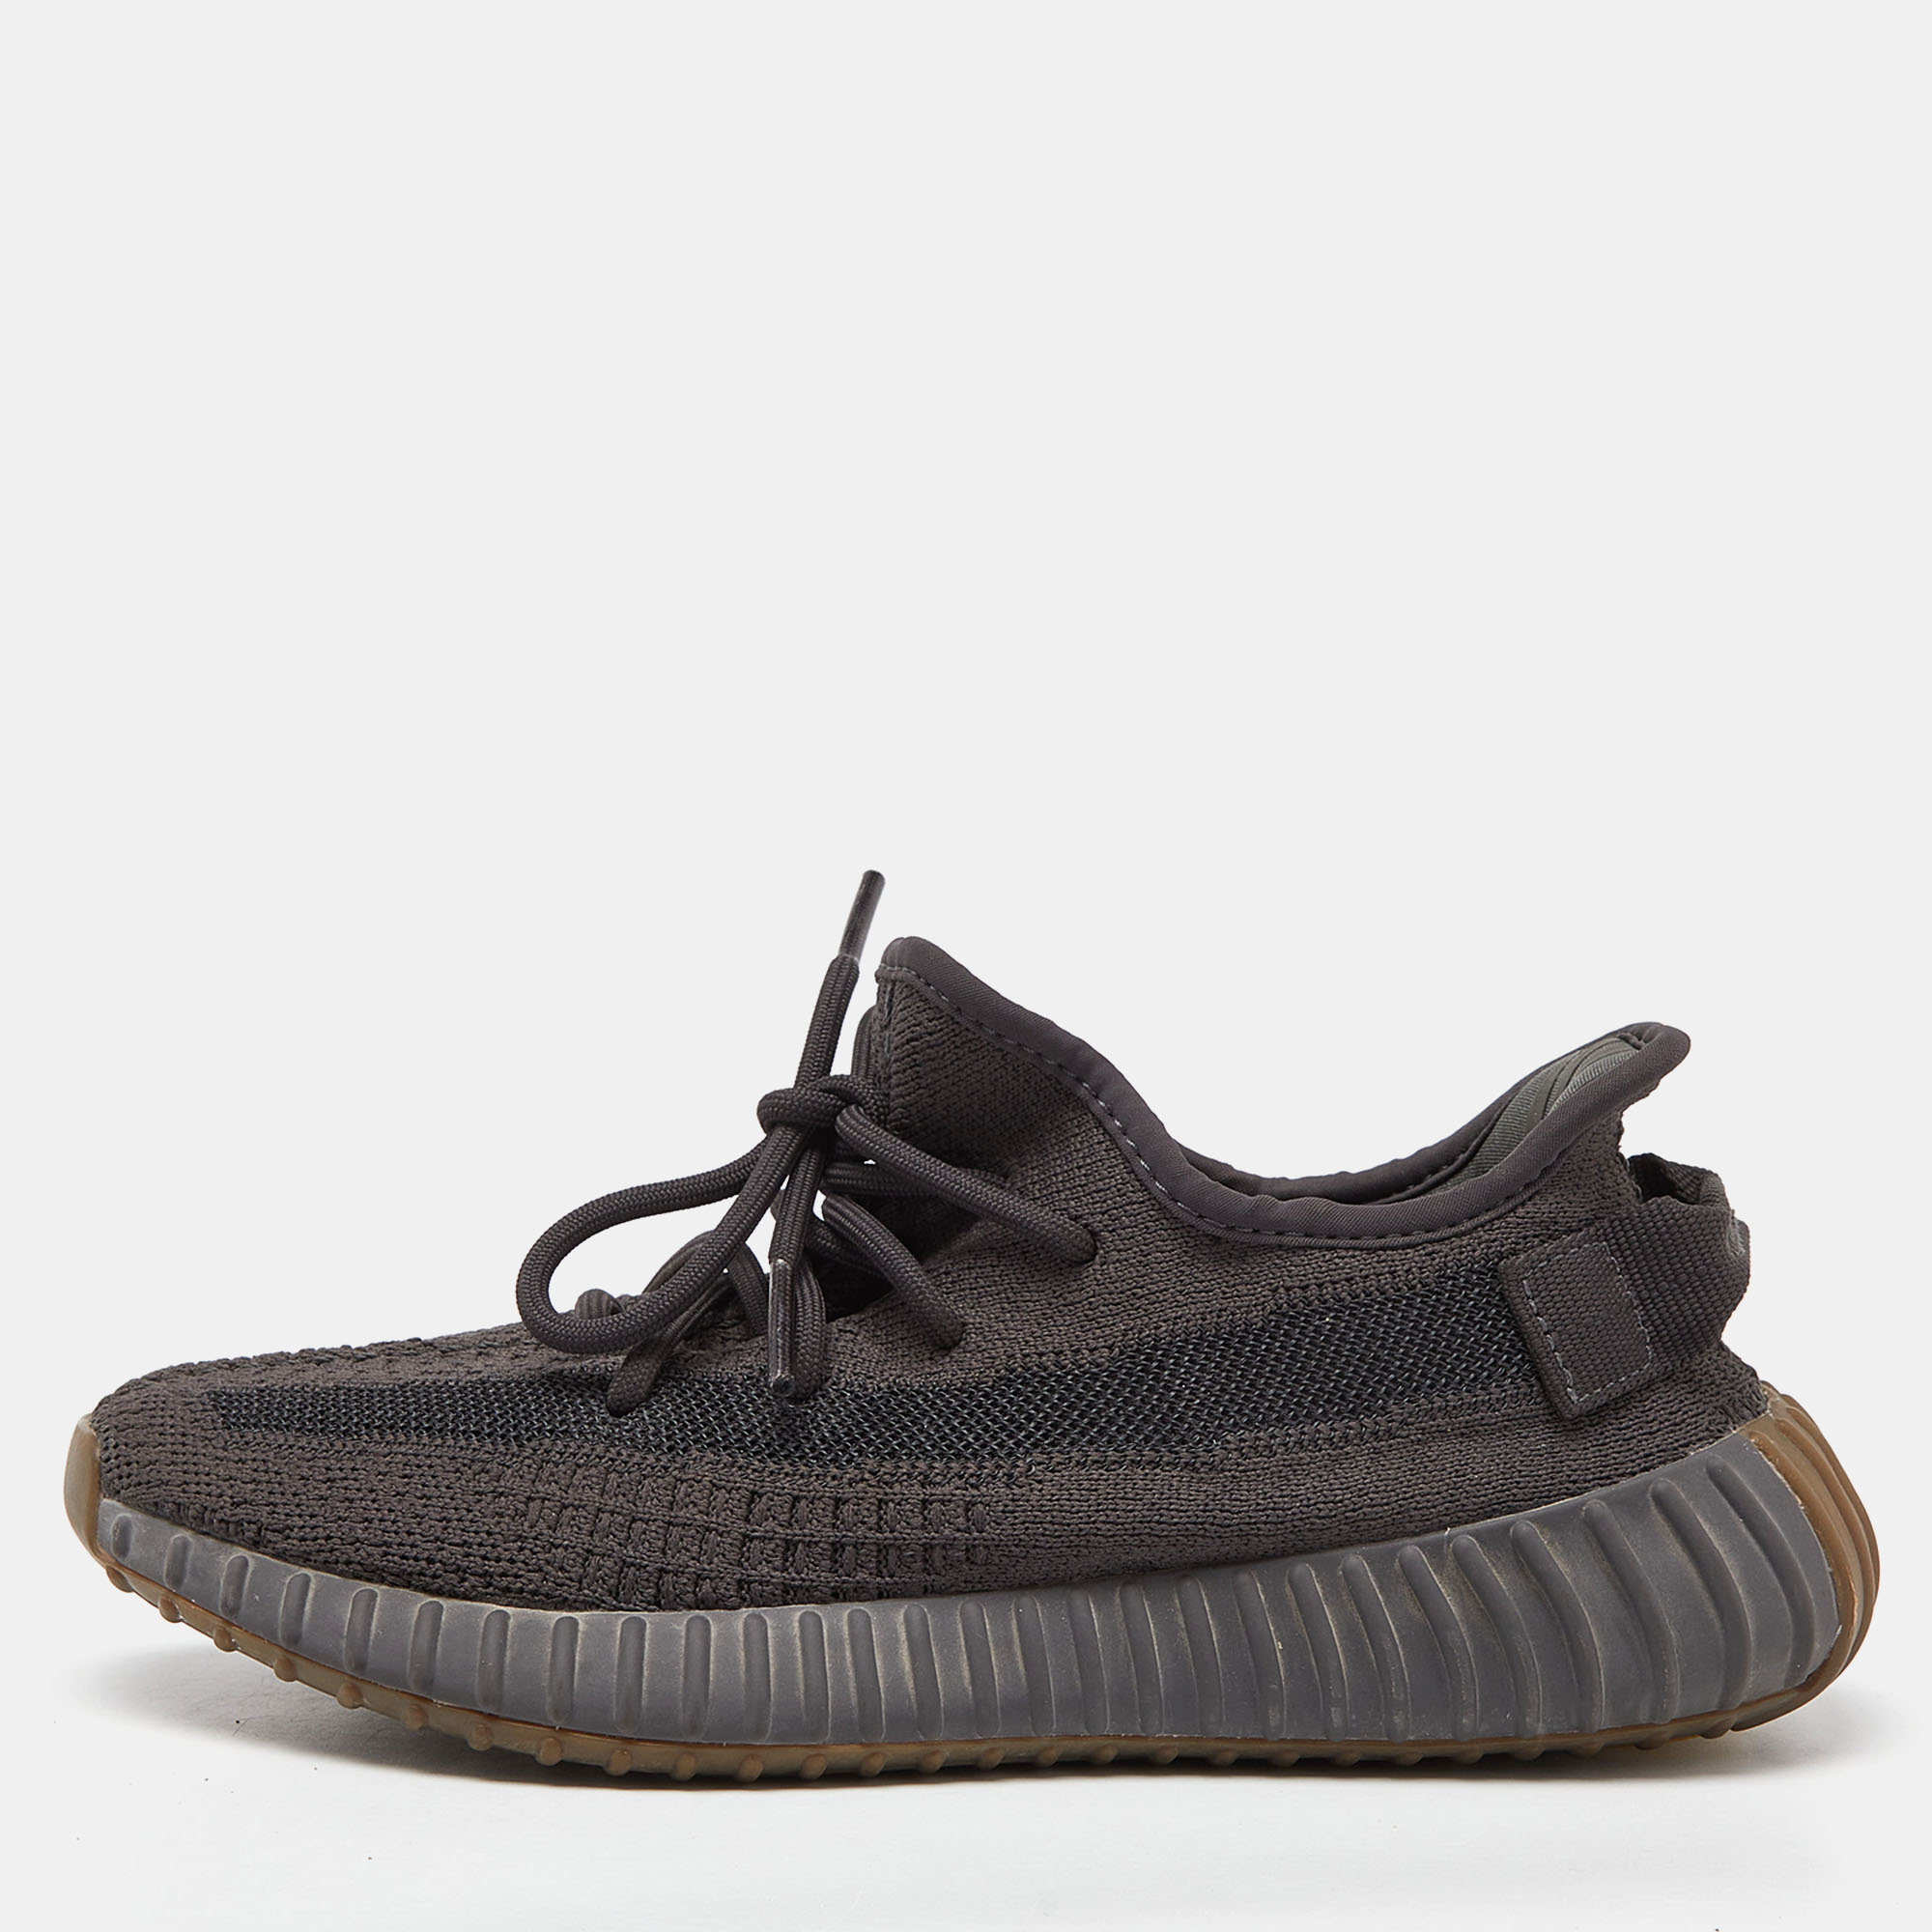 Coming in a classic silhouette these Yeezy x adidas sneakers are a seamless combination of luxury comfort and style. These sneakers are finished with signature details and comfortable insoles.